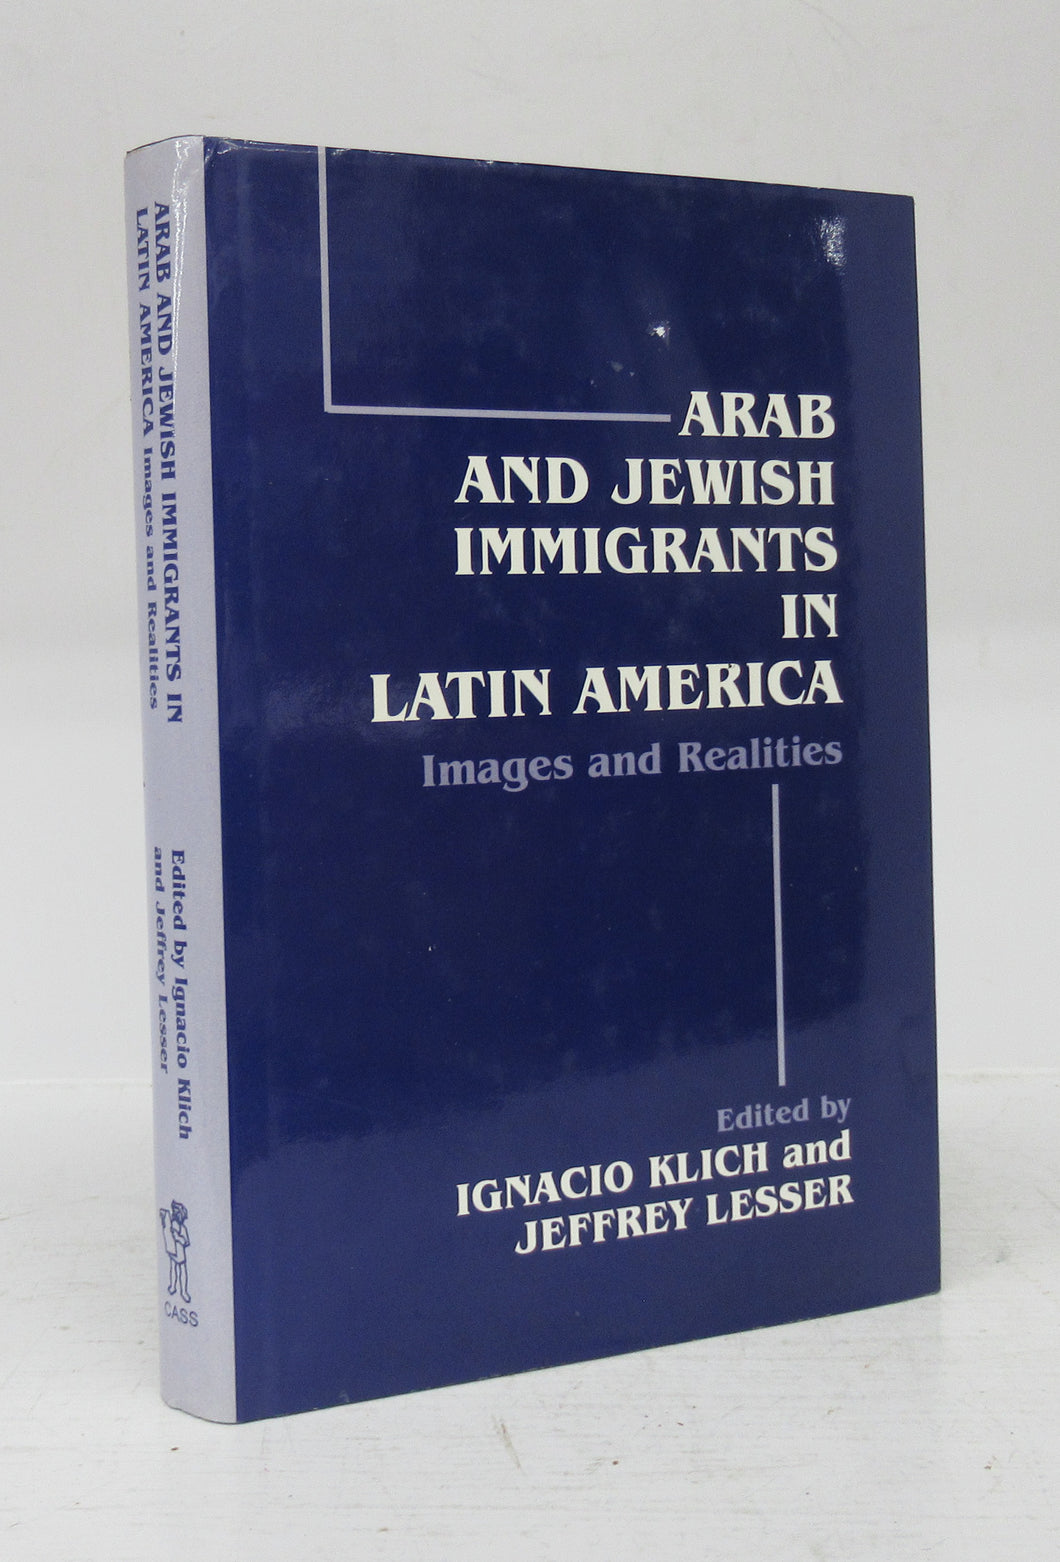 Arab and Jewish Immigrants in Latin America Images and Realities